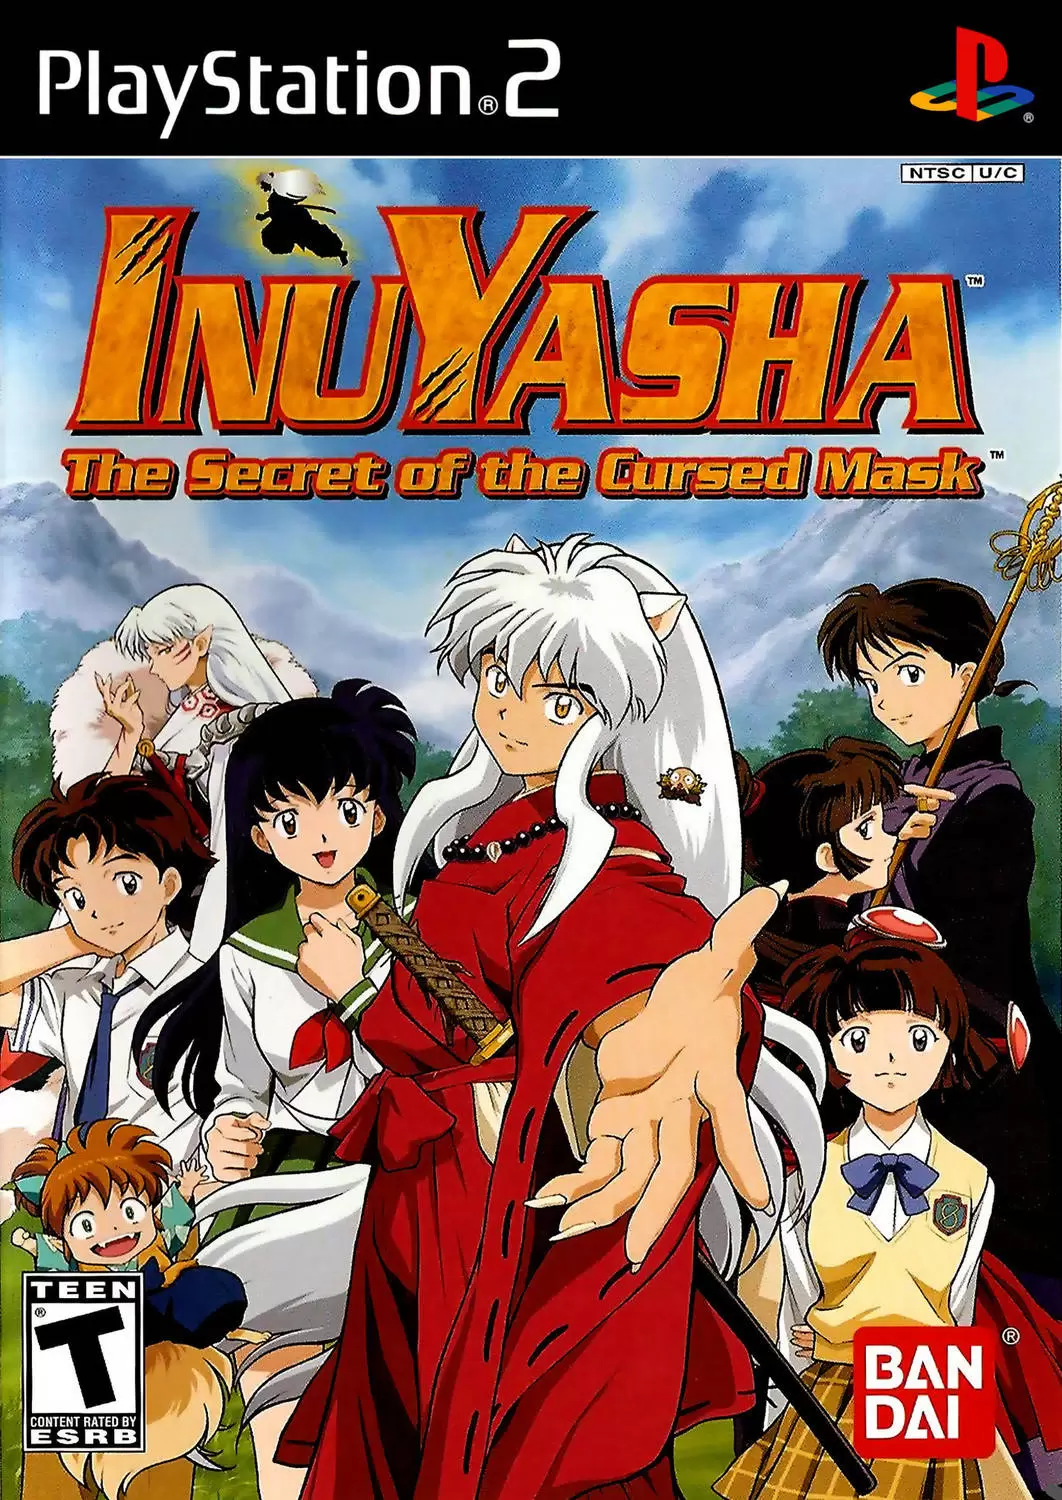 PS2 Games - InuYasha: The Secret of the Cursed Mask